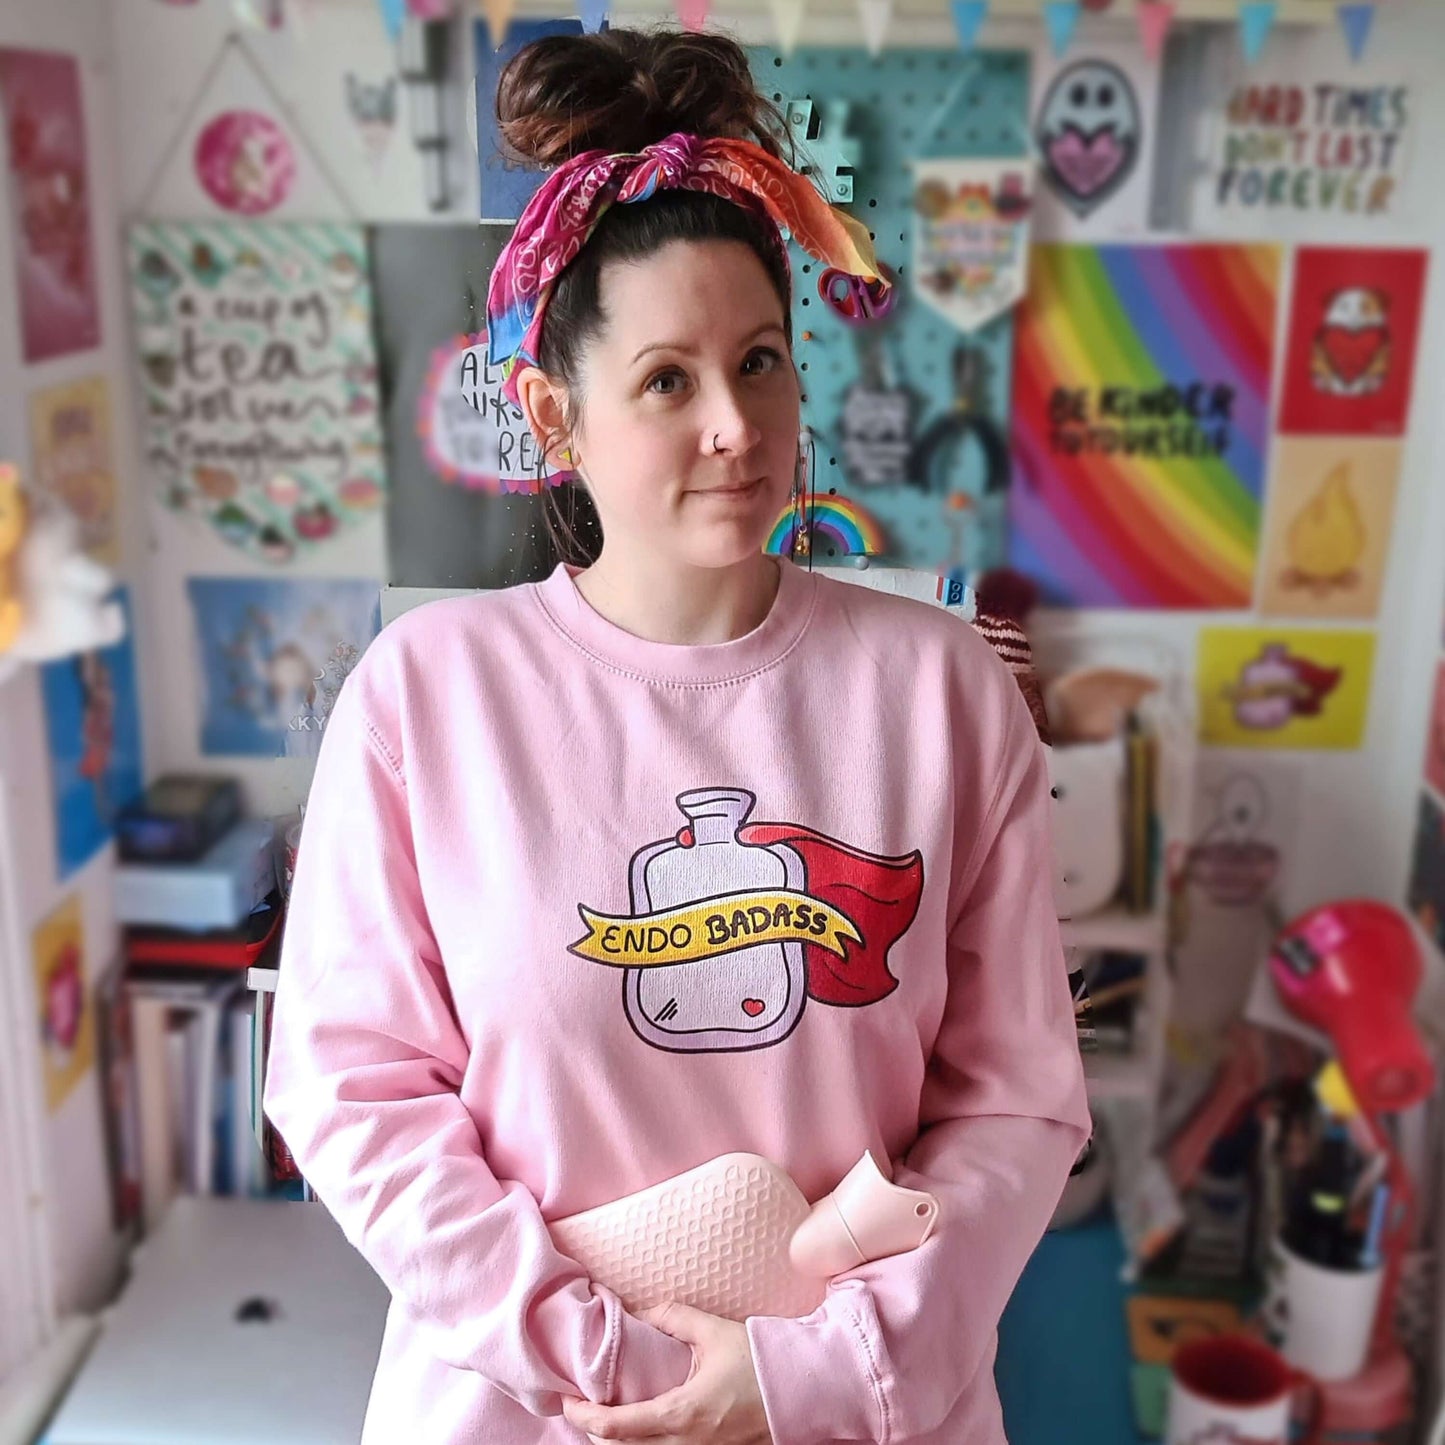 The Endo Badass Sweater - Endometriosis being modelled by Nikky with brown hair in a messy bun smiling clutching a pink hot waterbottle in front of a wall of their artwork. A pastel bubblegum baby pink sweatshirt jumper with a pink hot waterbottle with a small red heart, red cape and yellow banner reading 'endo badass' in black text. The hand drawn design is raising awareness for endometriosis and pelvic pain.